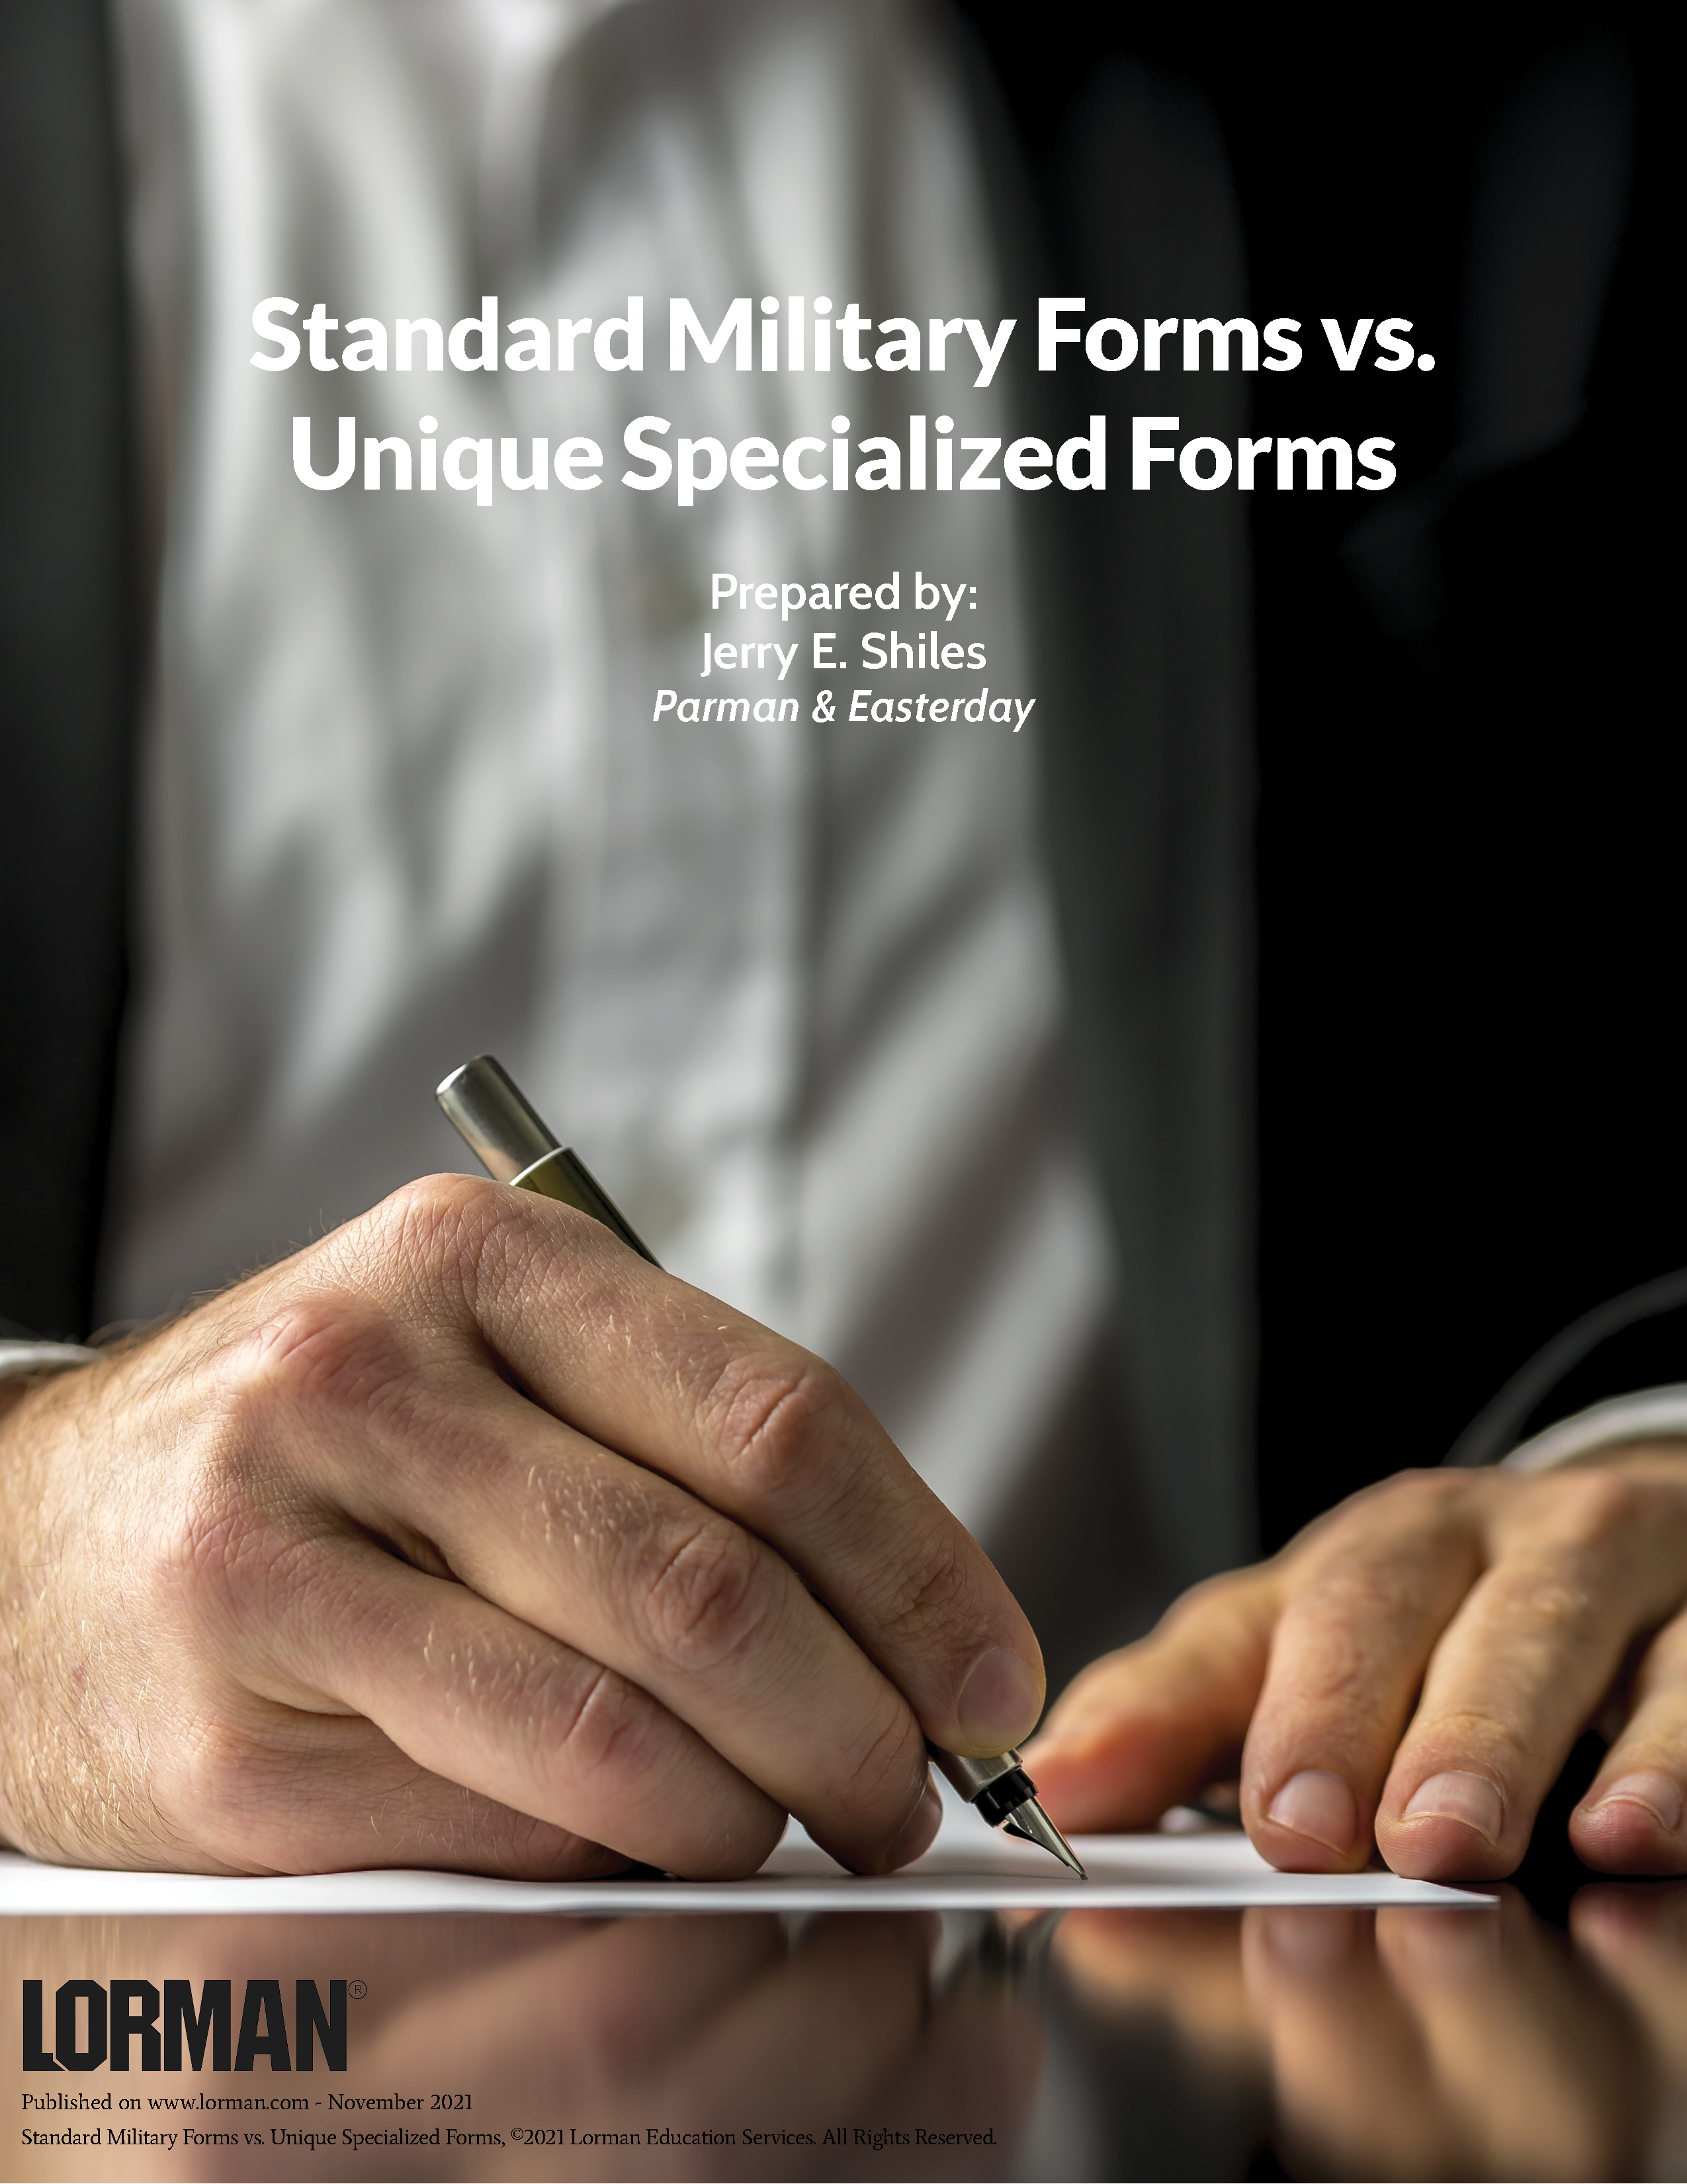 Standard Military Forms vs. Unique Specialized Forms